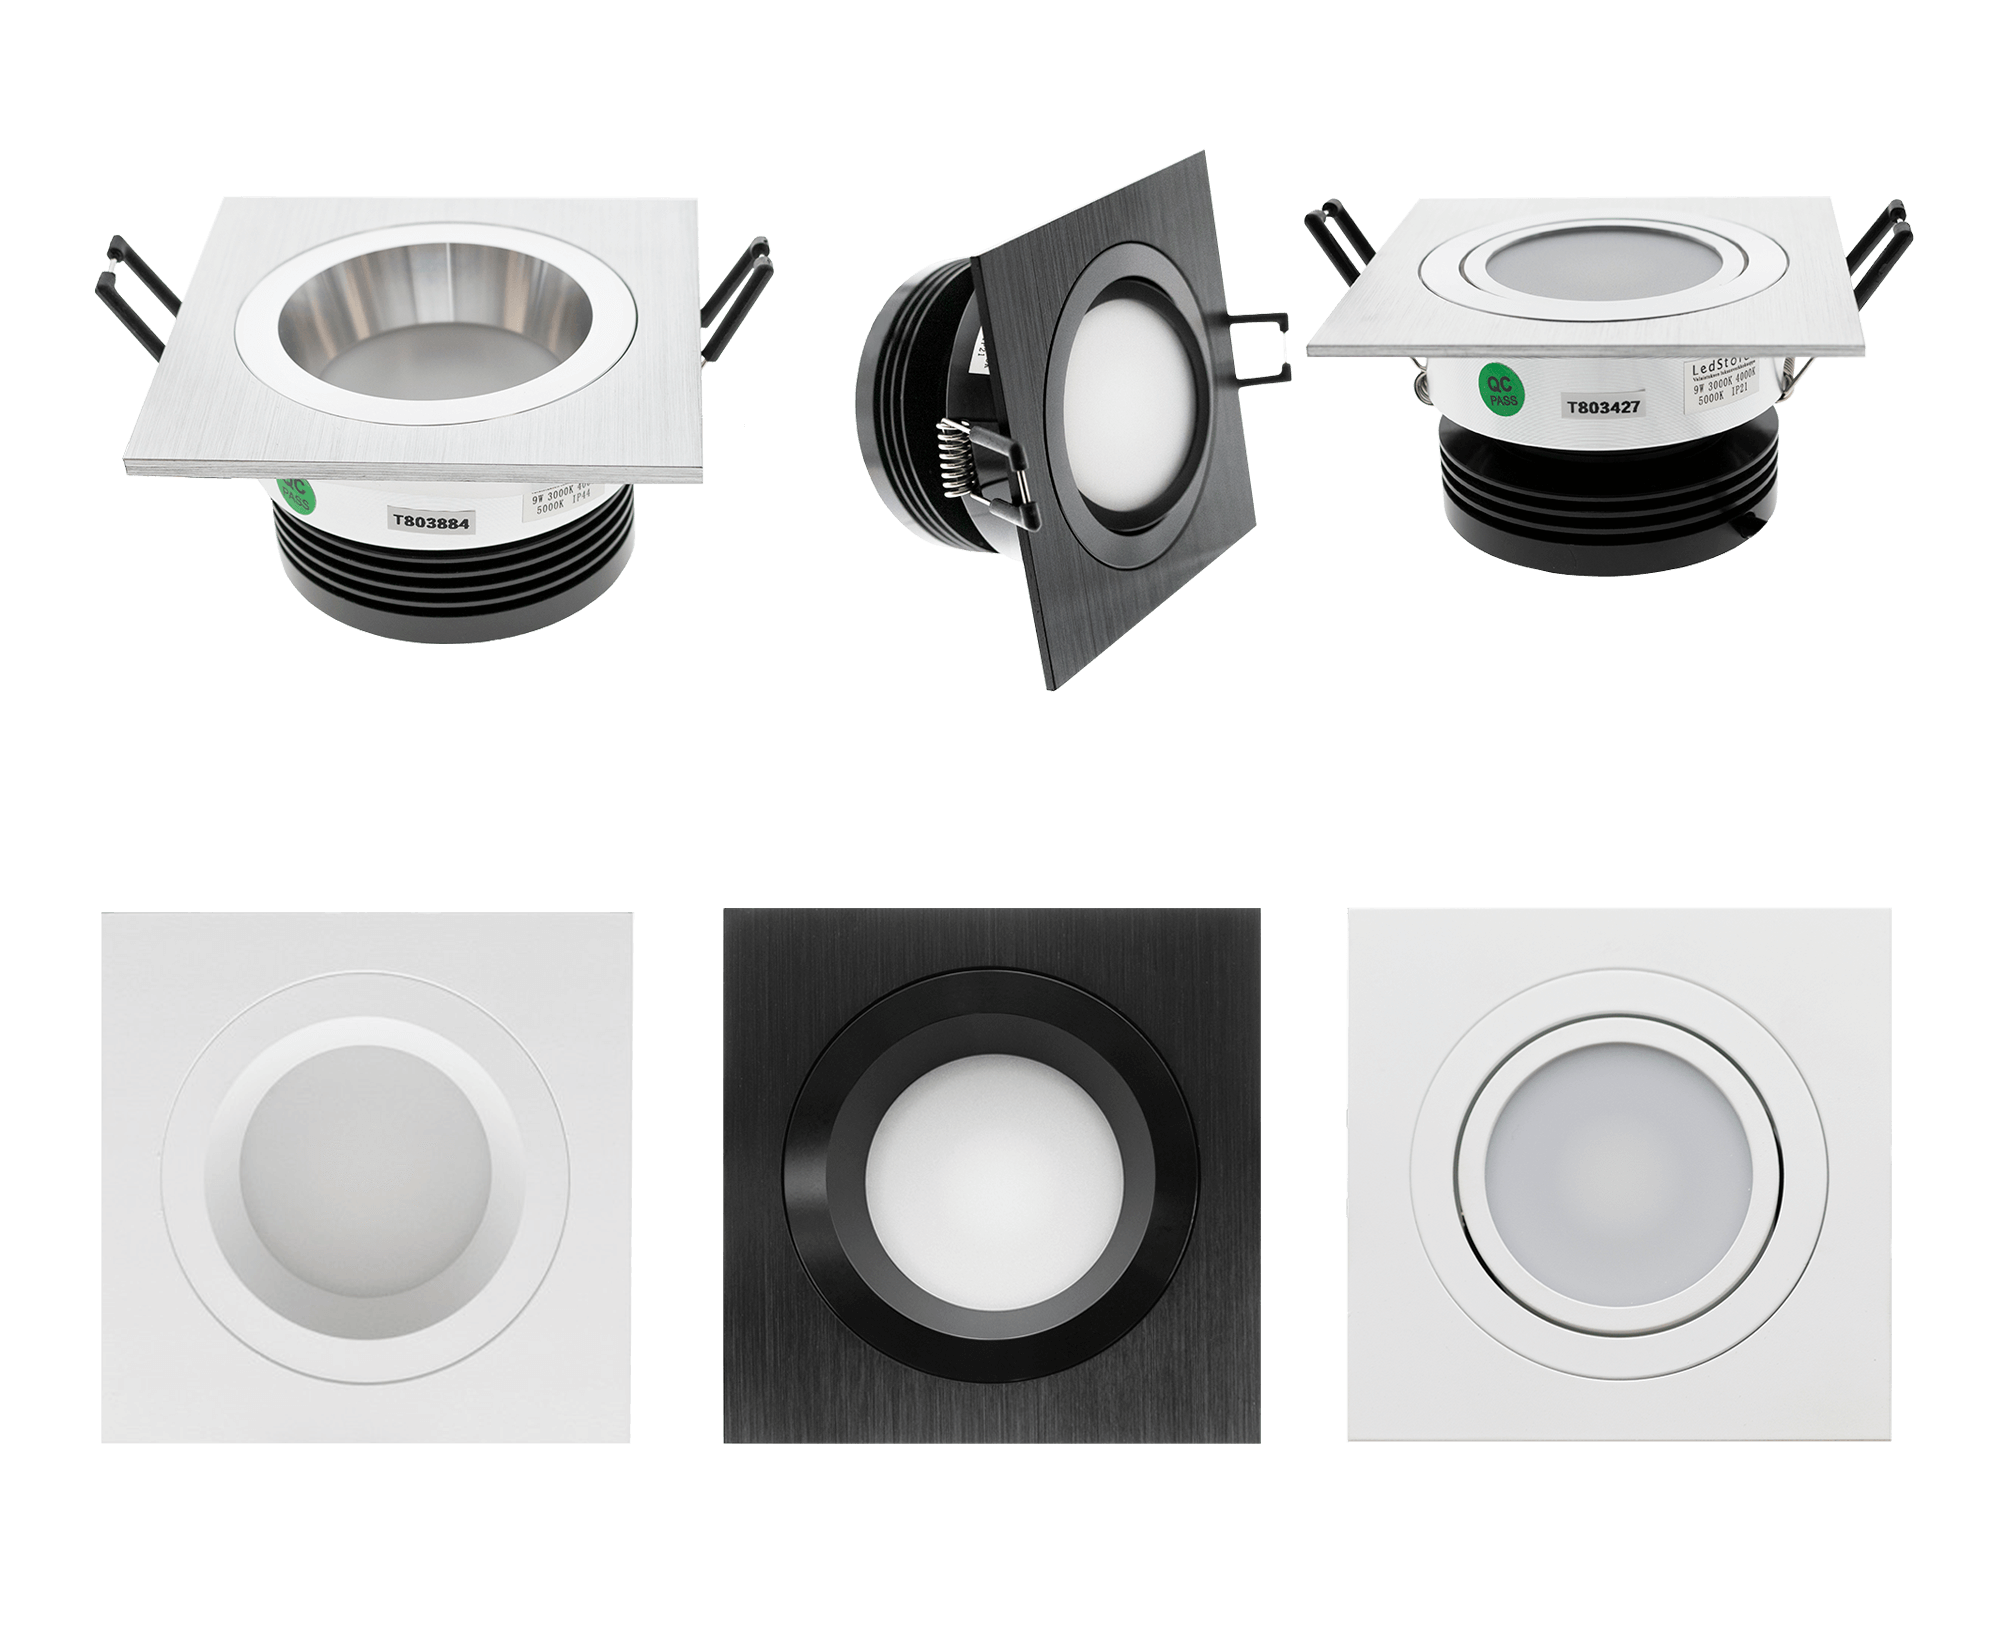 Spotlight colour temperature control is available on all LedStore spotlights